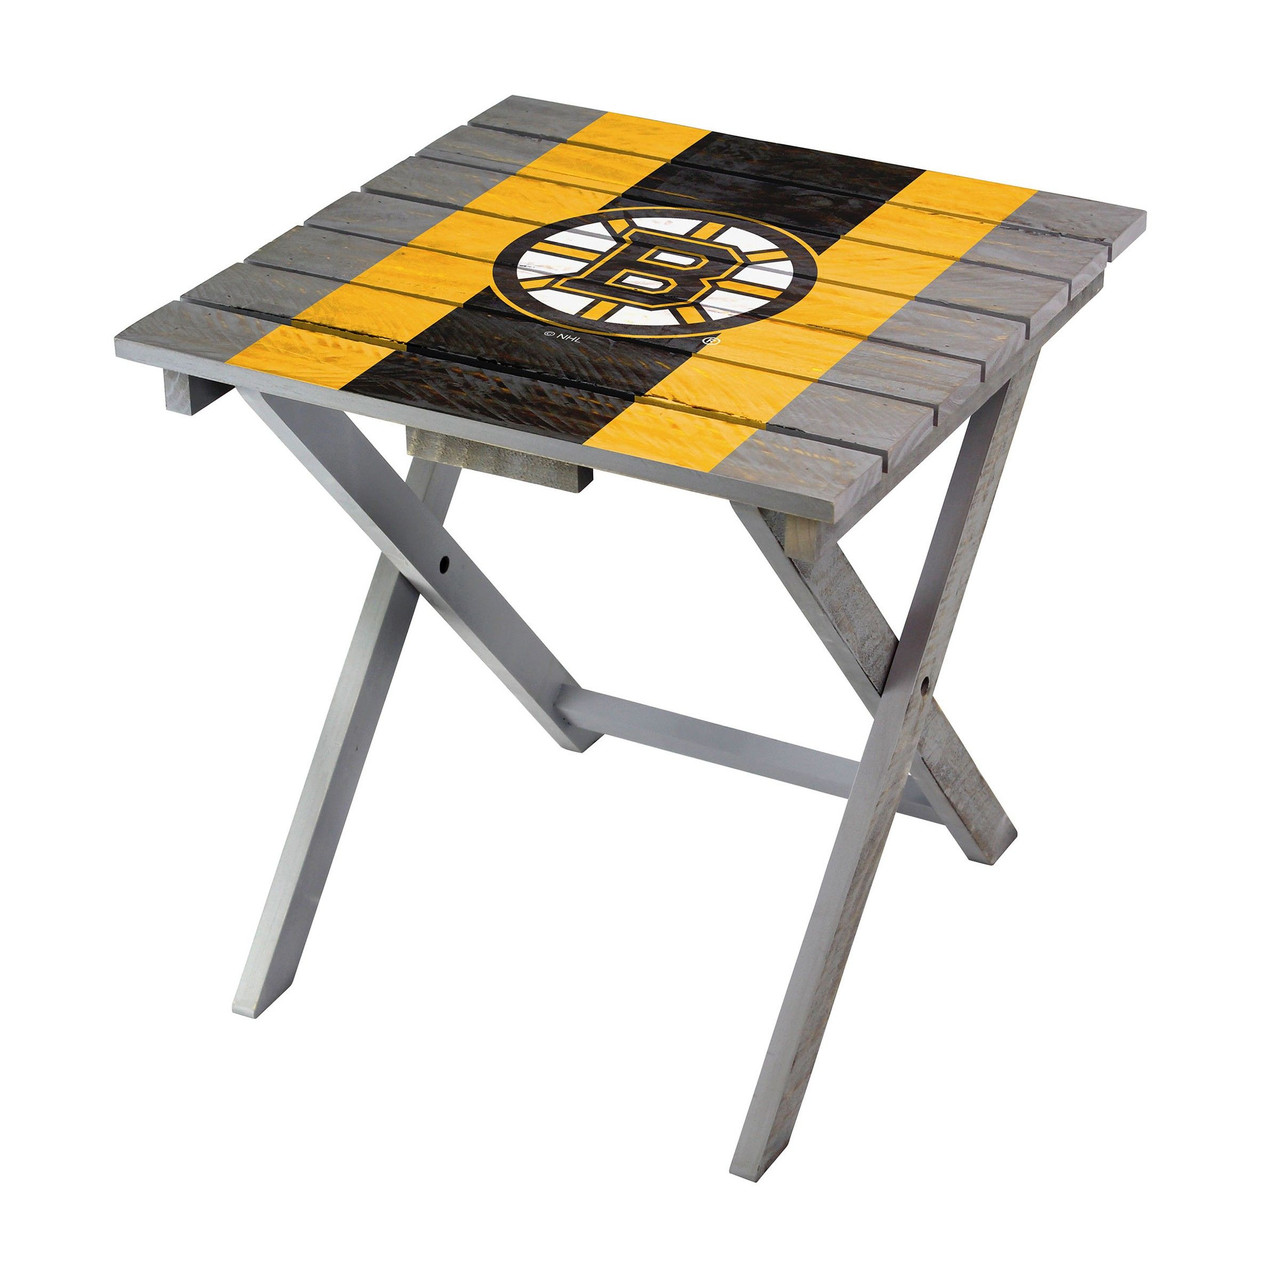 844-4001, BOS, Boston, Bruins, Folding, Adirondack, Table, FREE SHIPPING, Imperial, NHL, Wood, Outdoor, Imperial, 720801844916